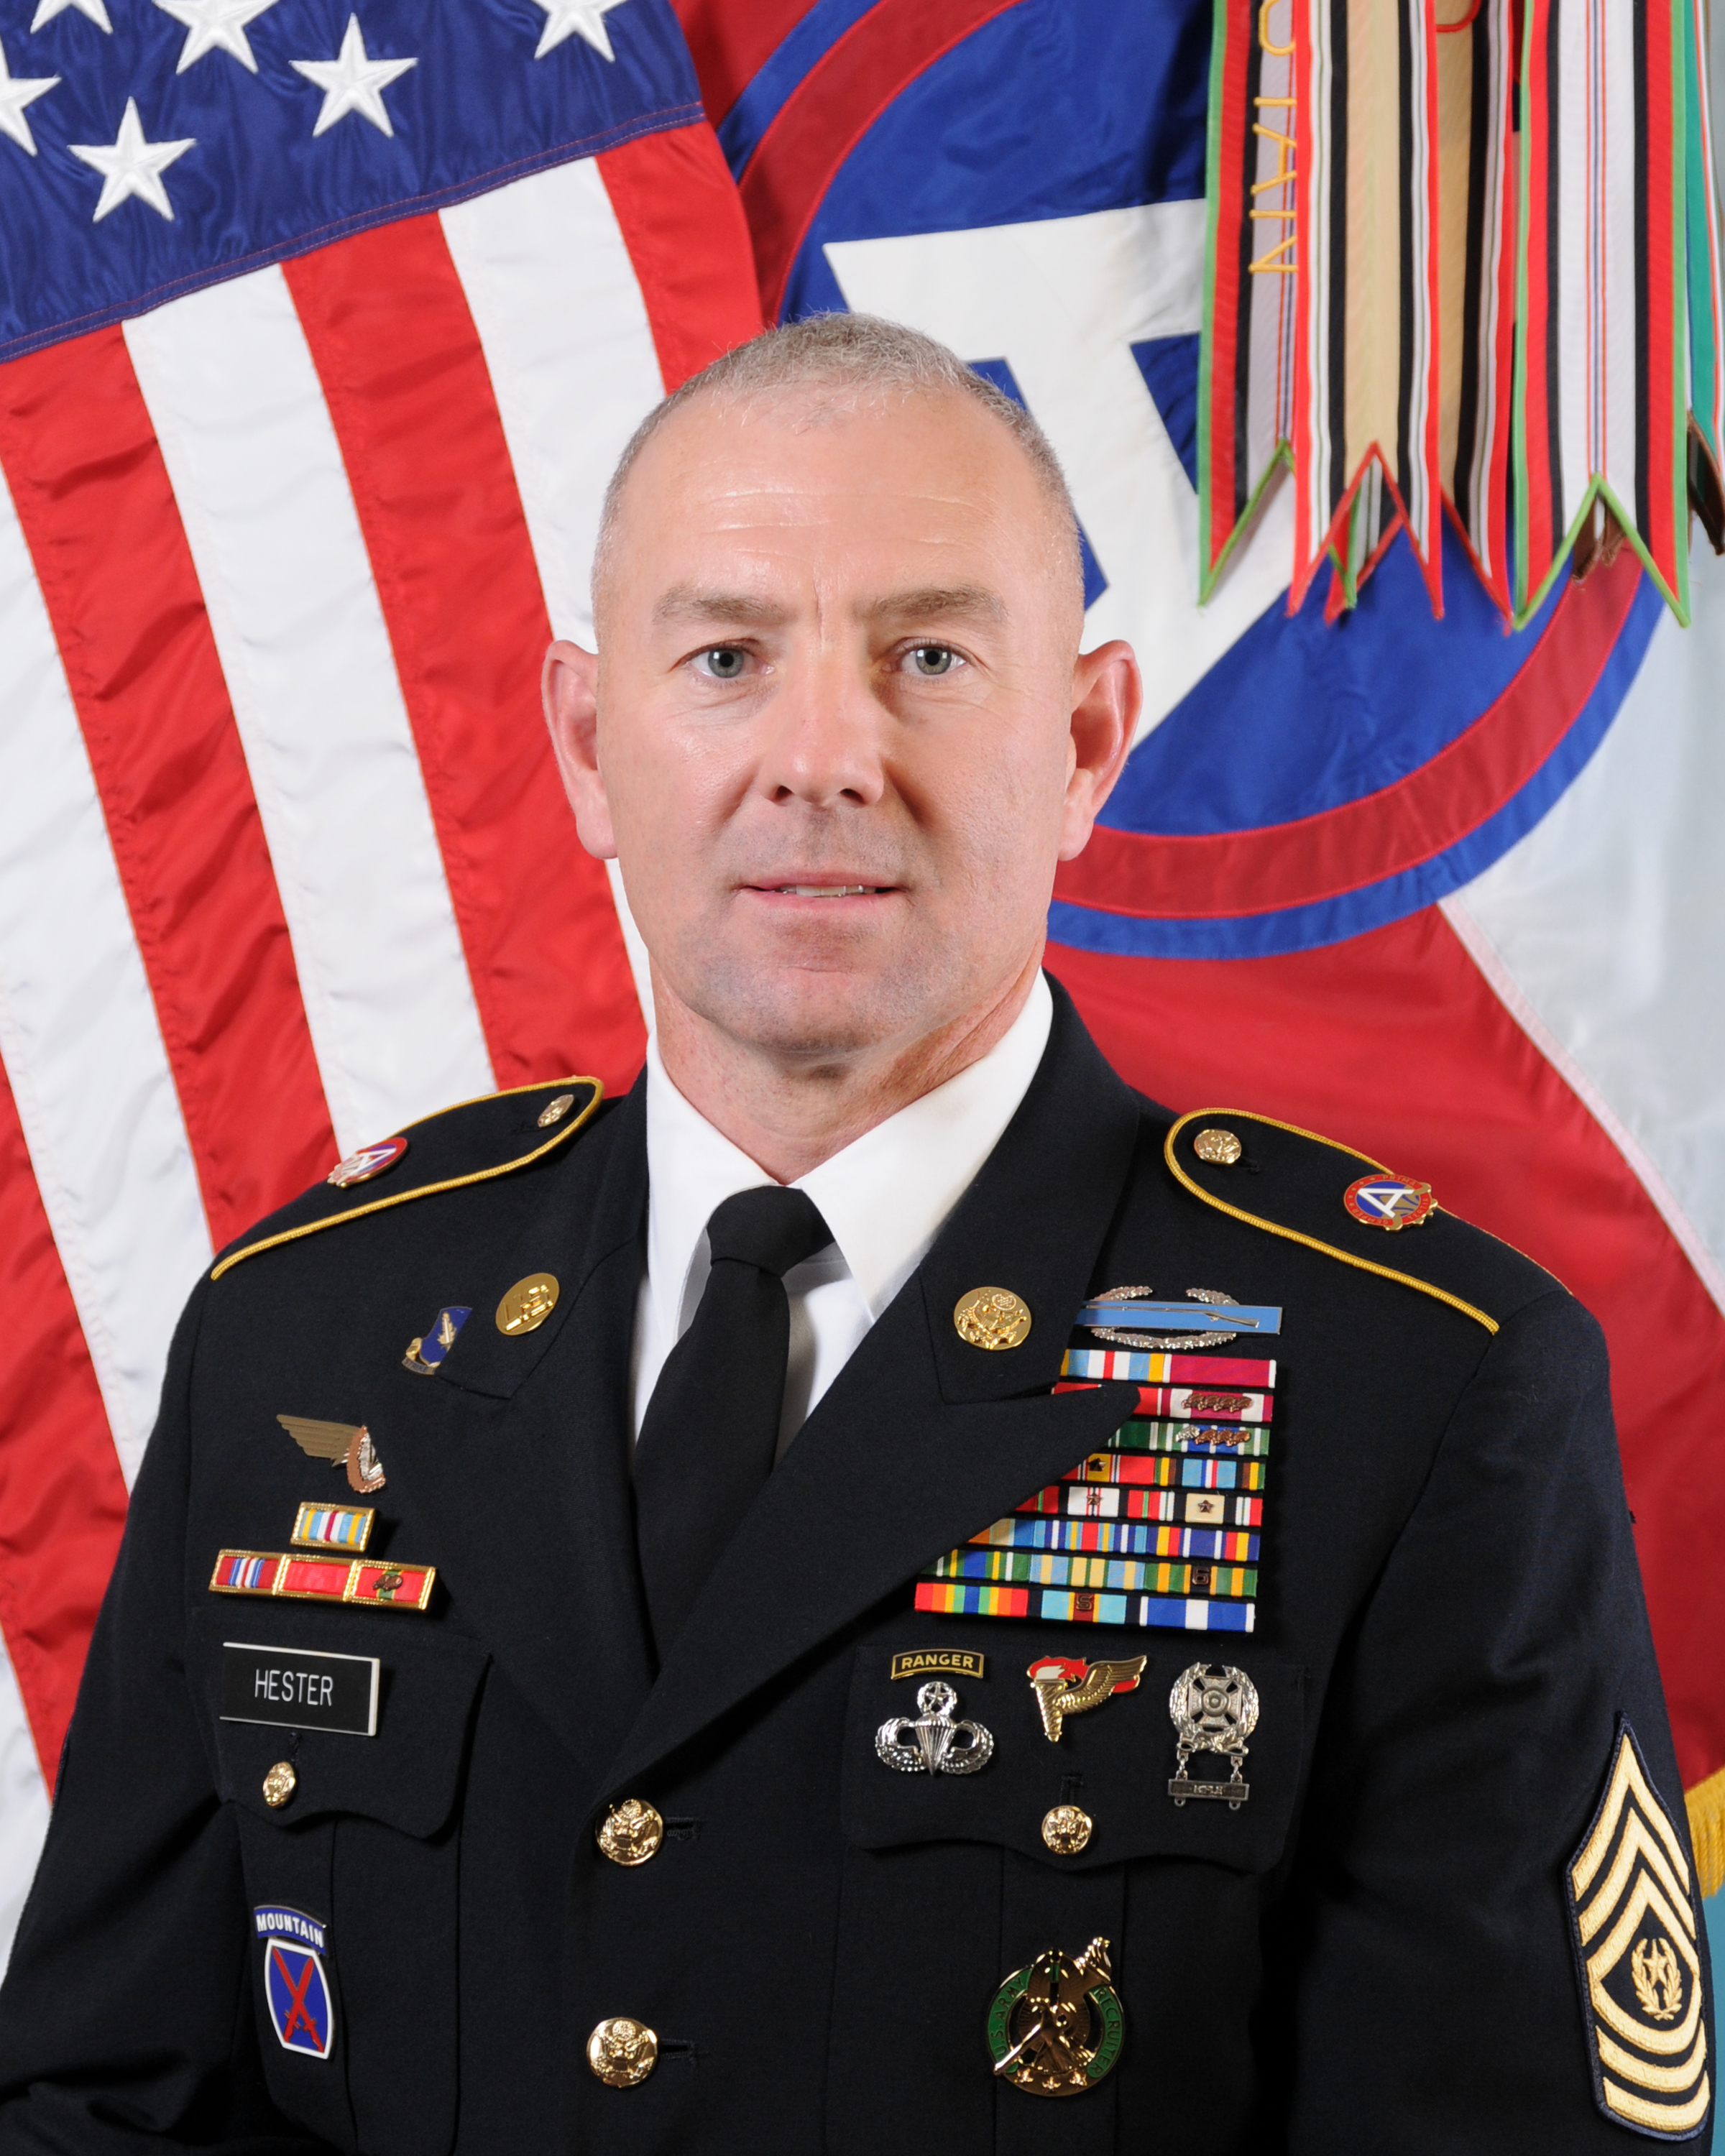 Official Photo of Command Sergeant Major Brian A. Hester